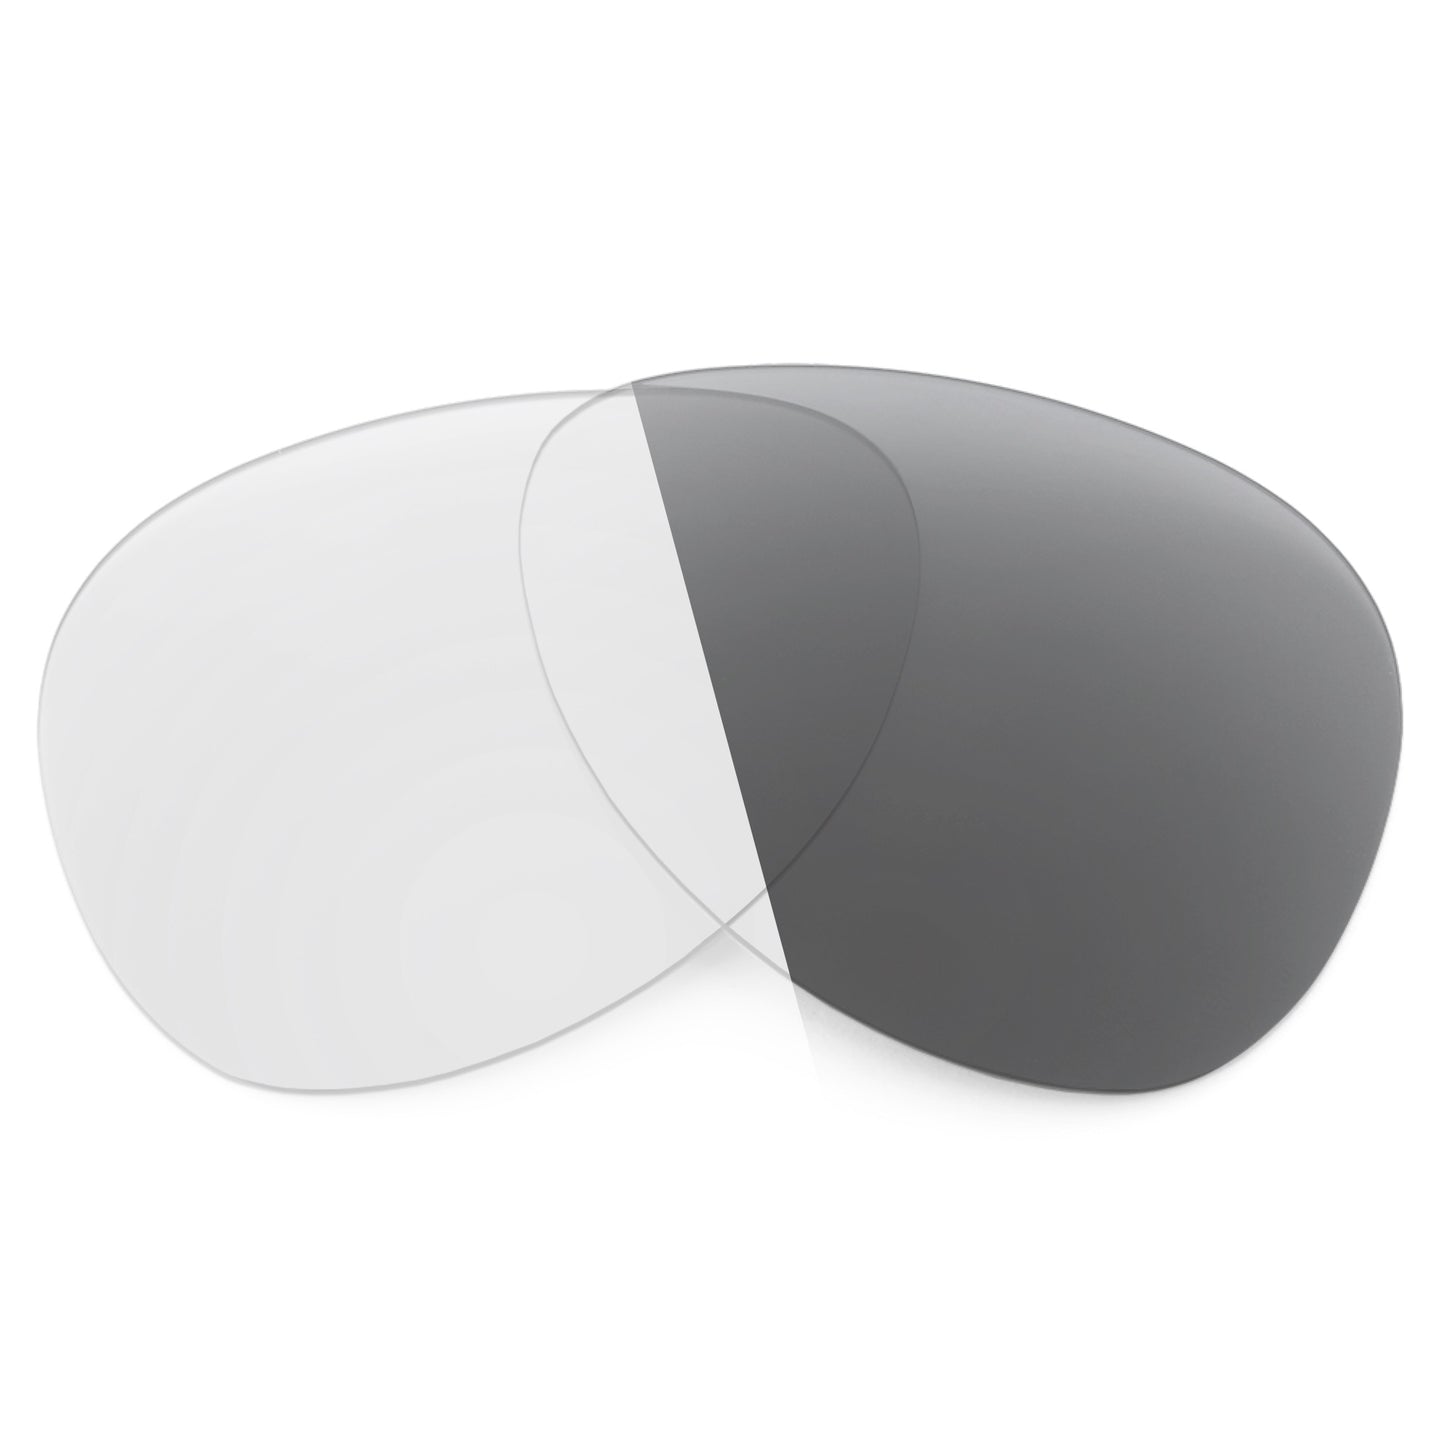 Revant replacement lenses for Ray-Ban RB3528 61mm Non-Polarized Adapt Gray Photochromic